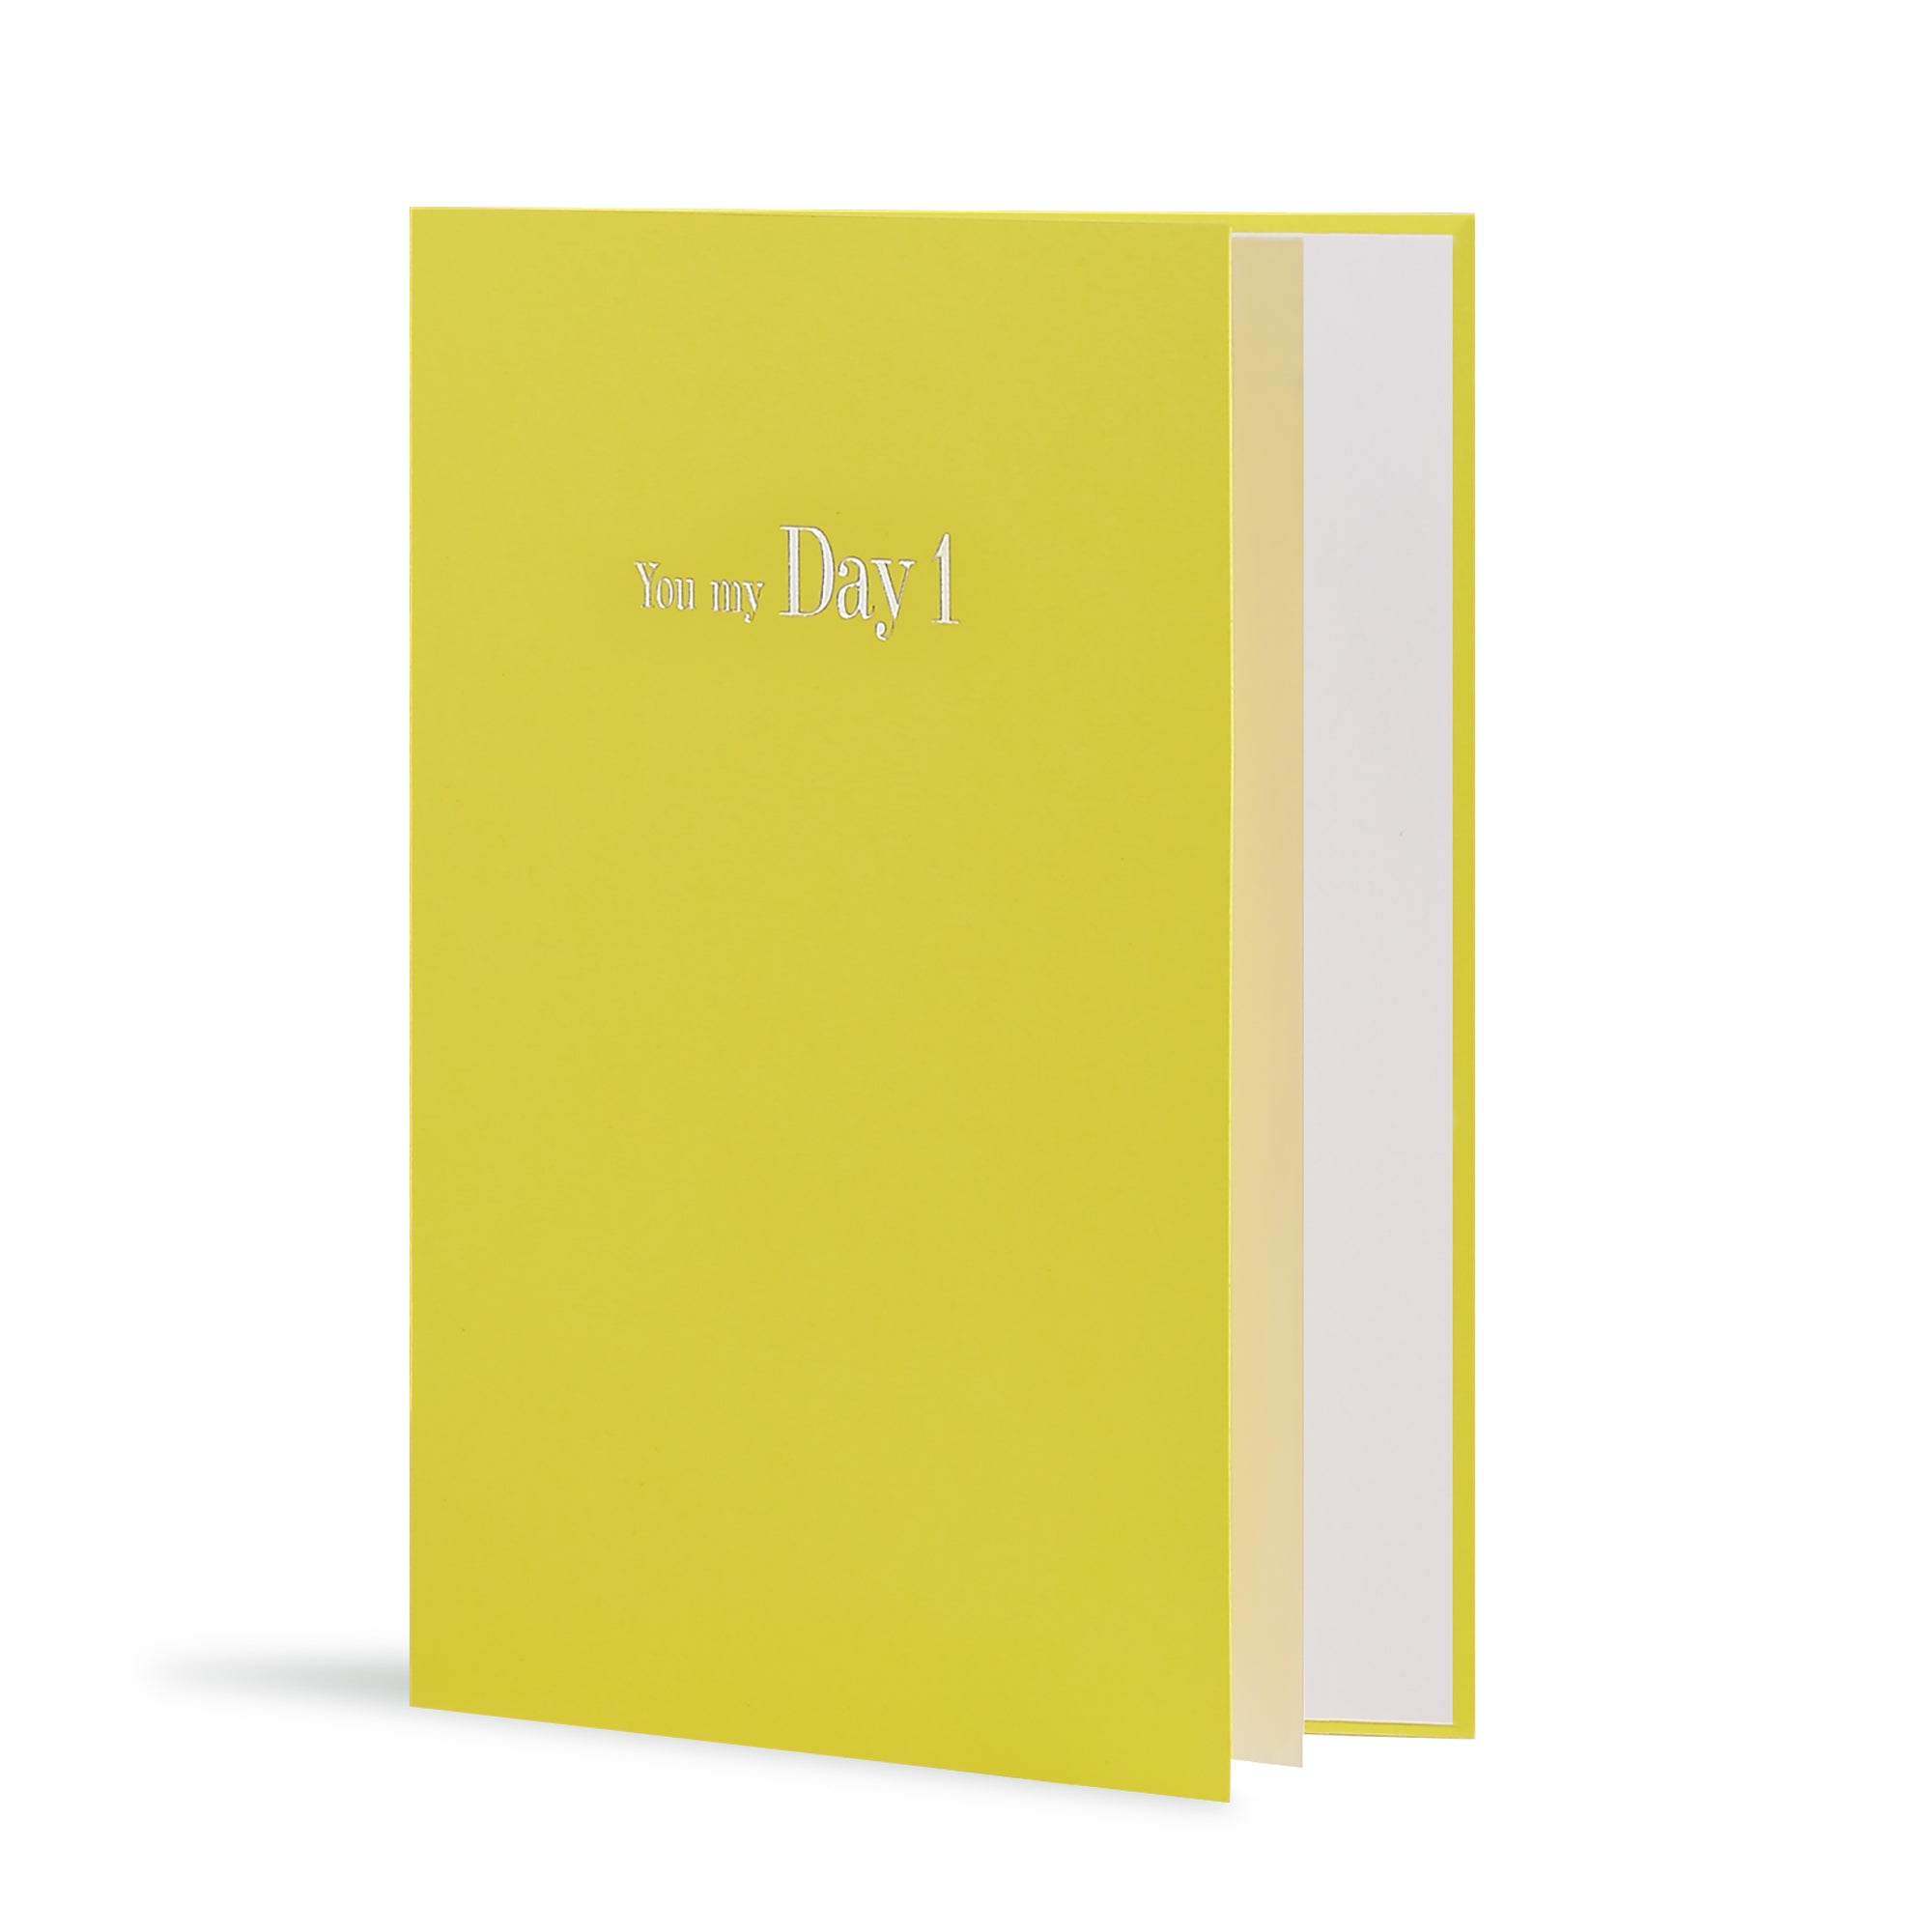 You My Day  Greeting Card in Yellow, Side